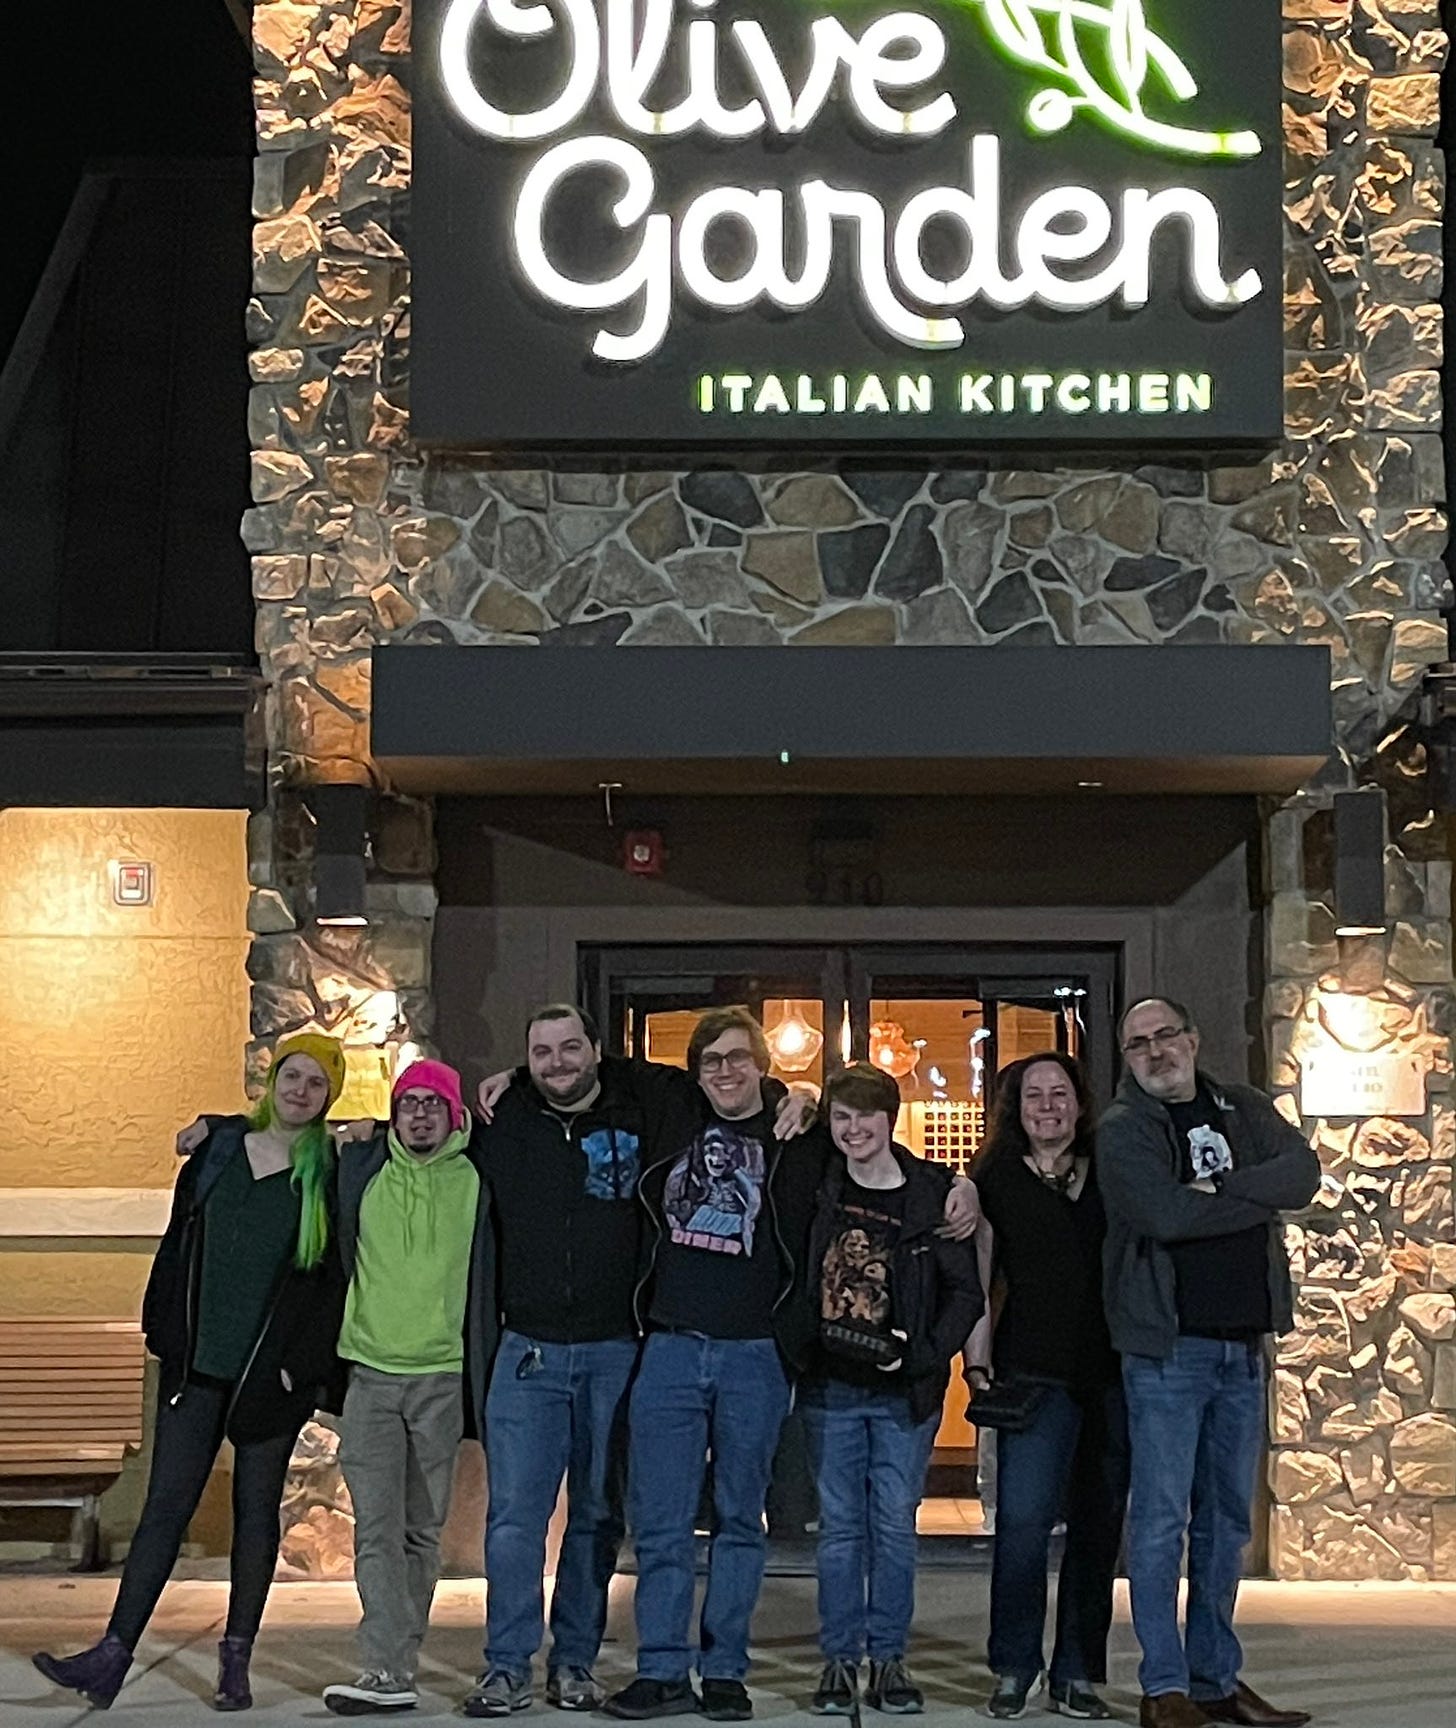 A group of authors standing in front of an Olive Garden restaurant.